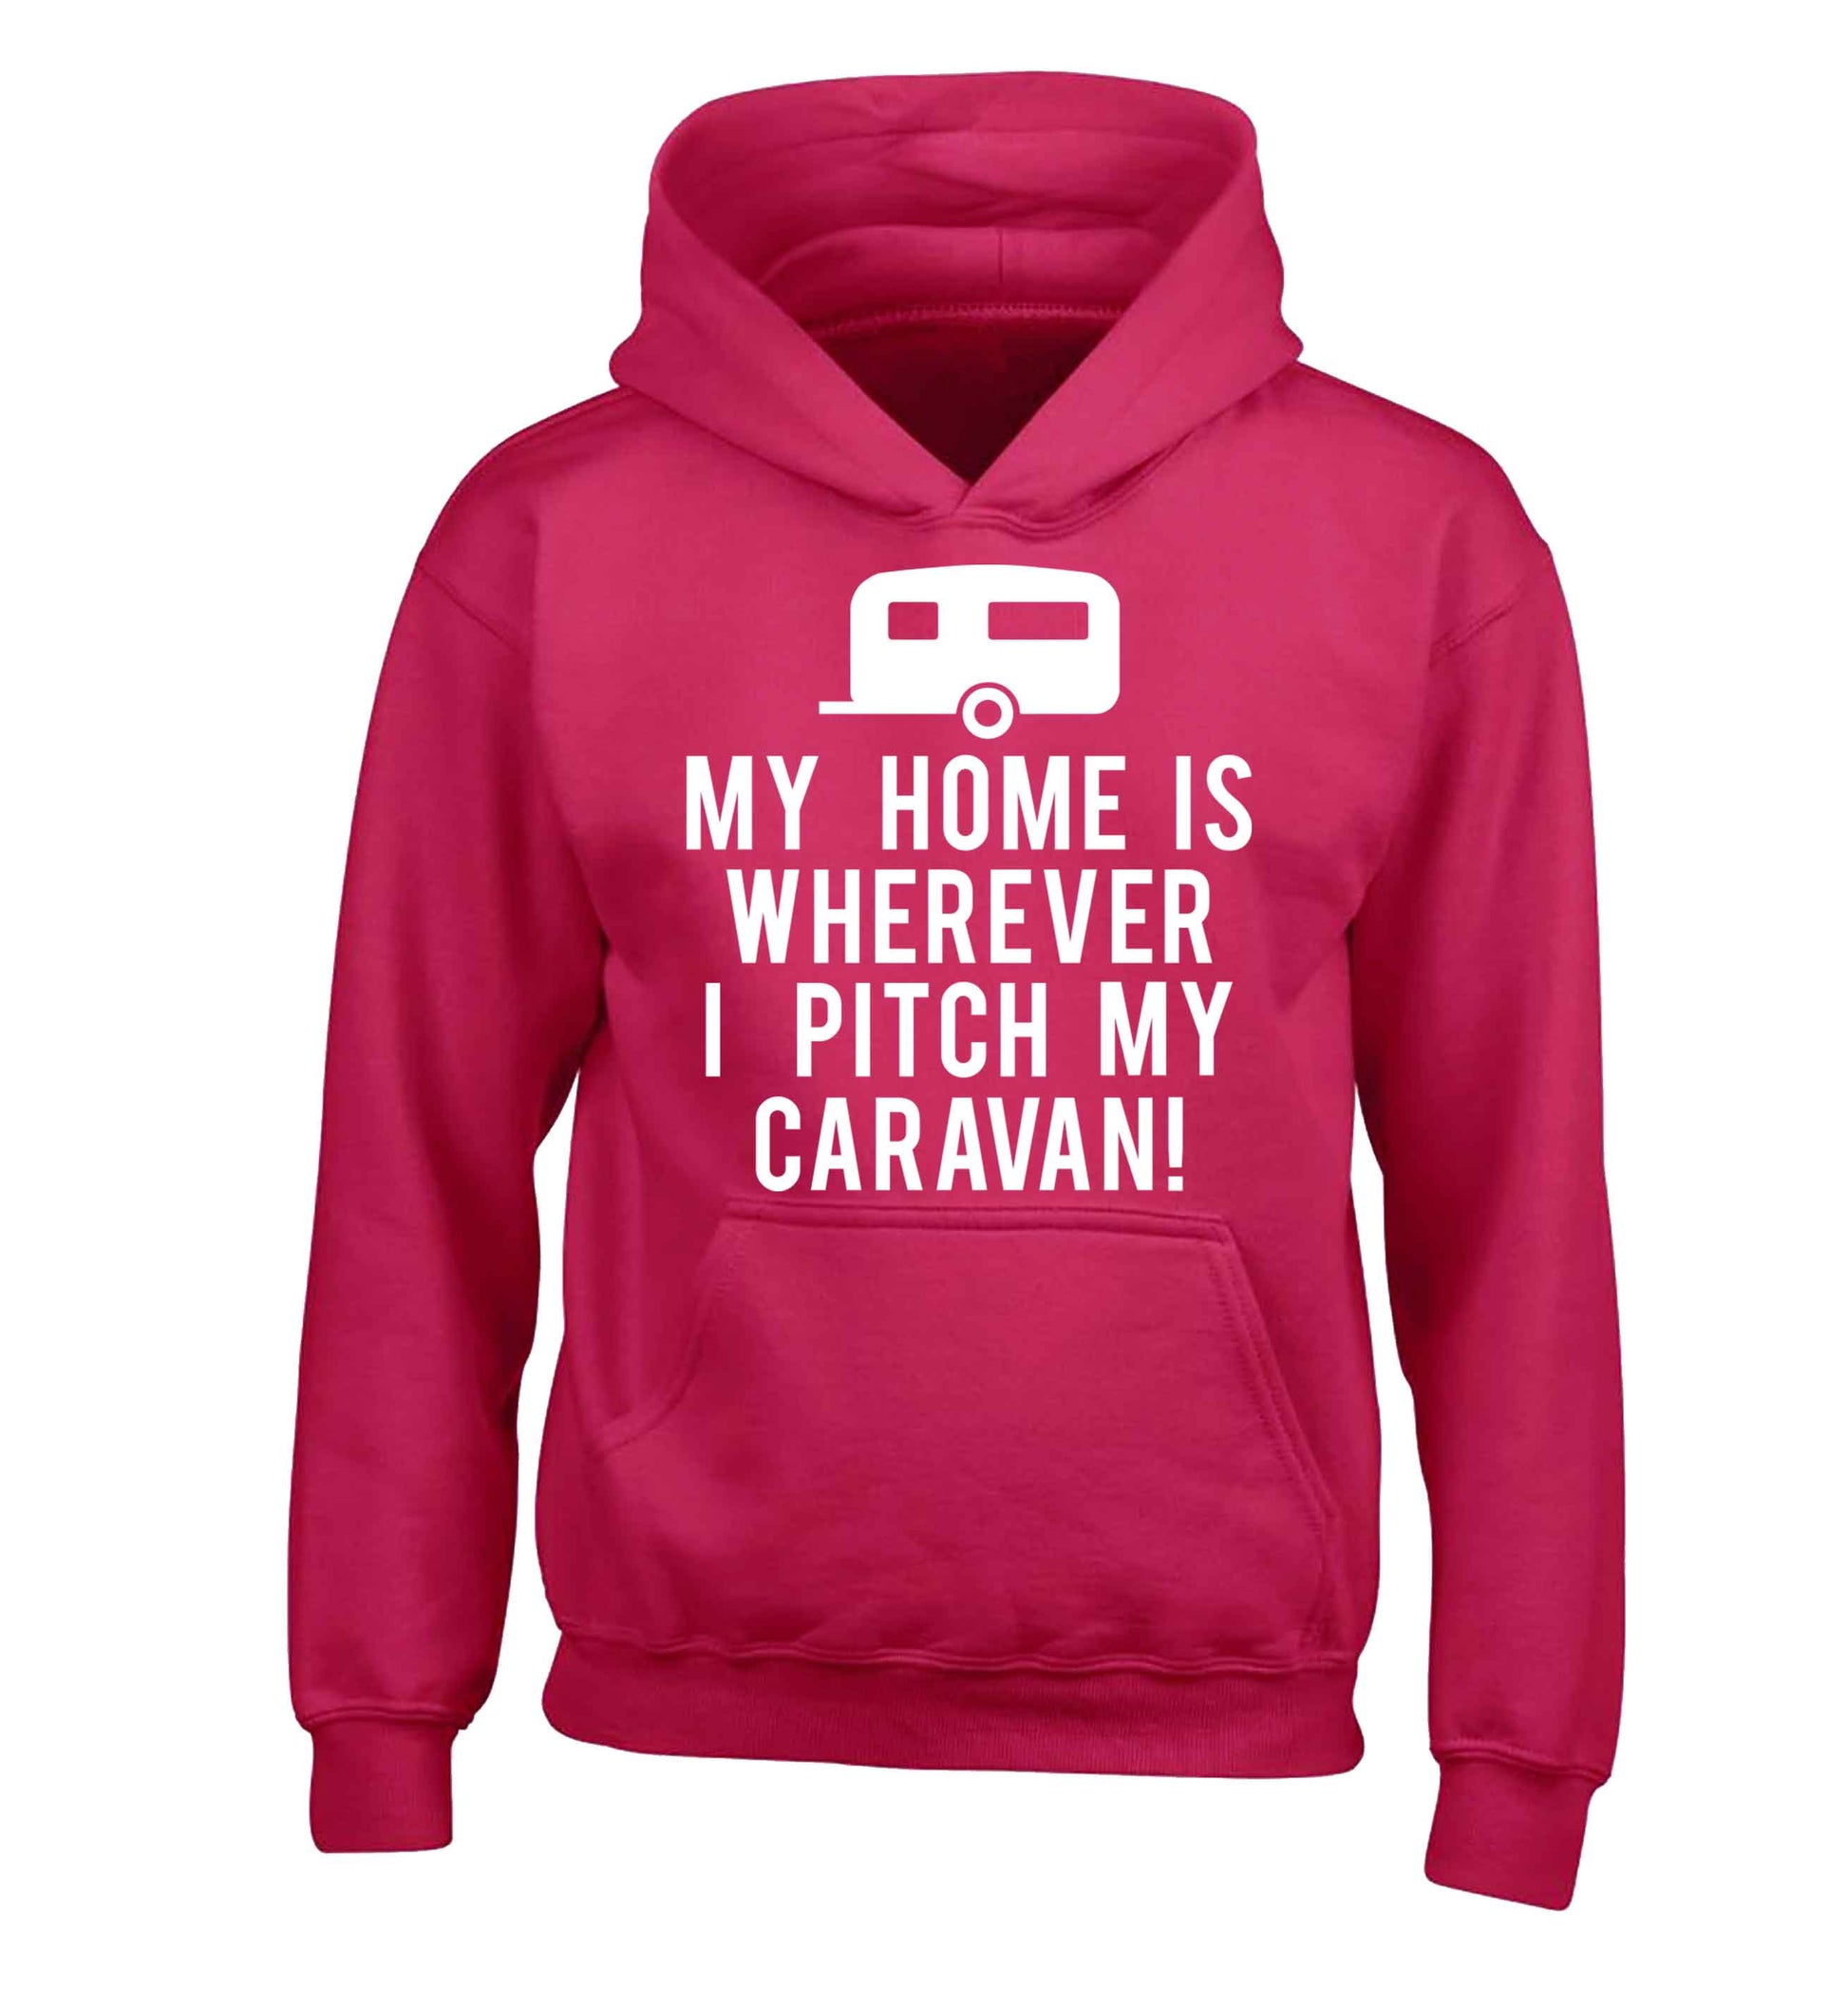 My home is wherever I pitch my caravan children's pink hoodie 12-13 Years